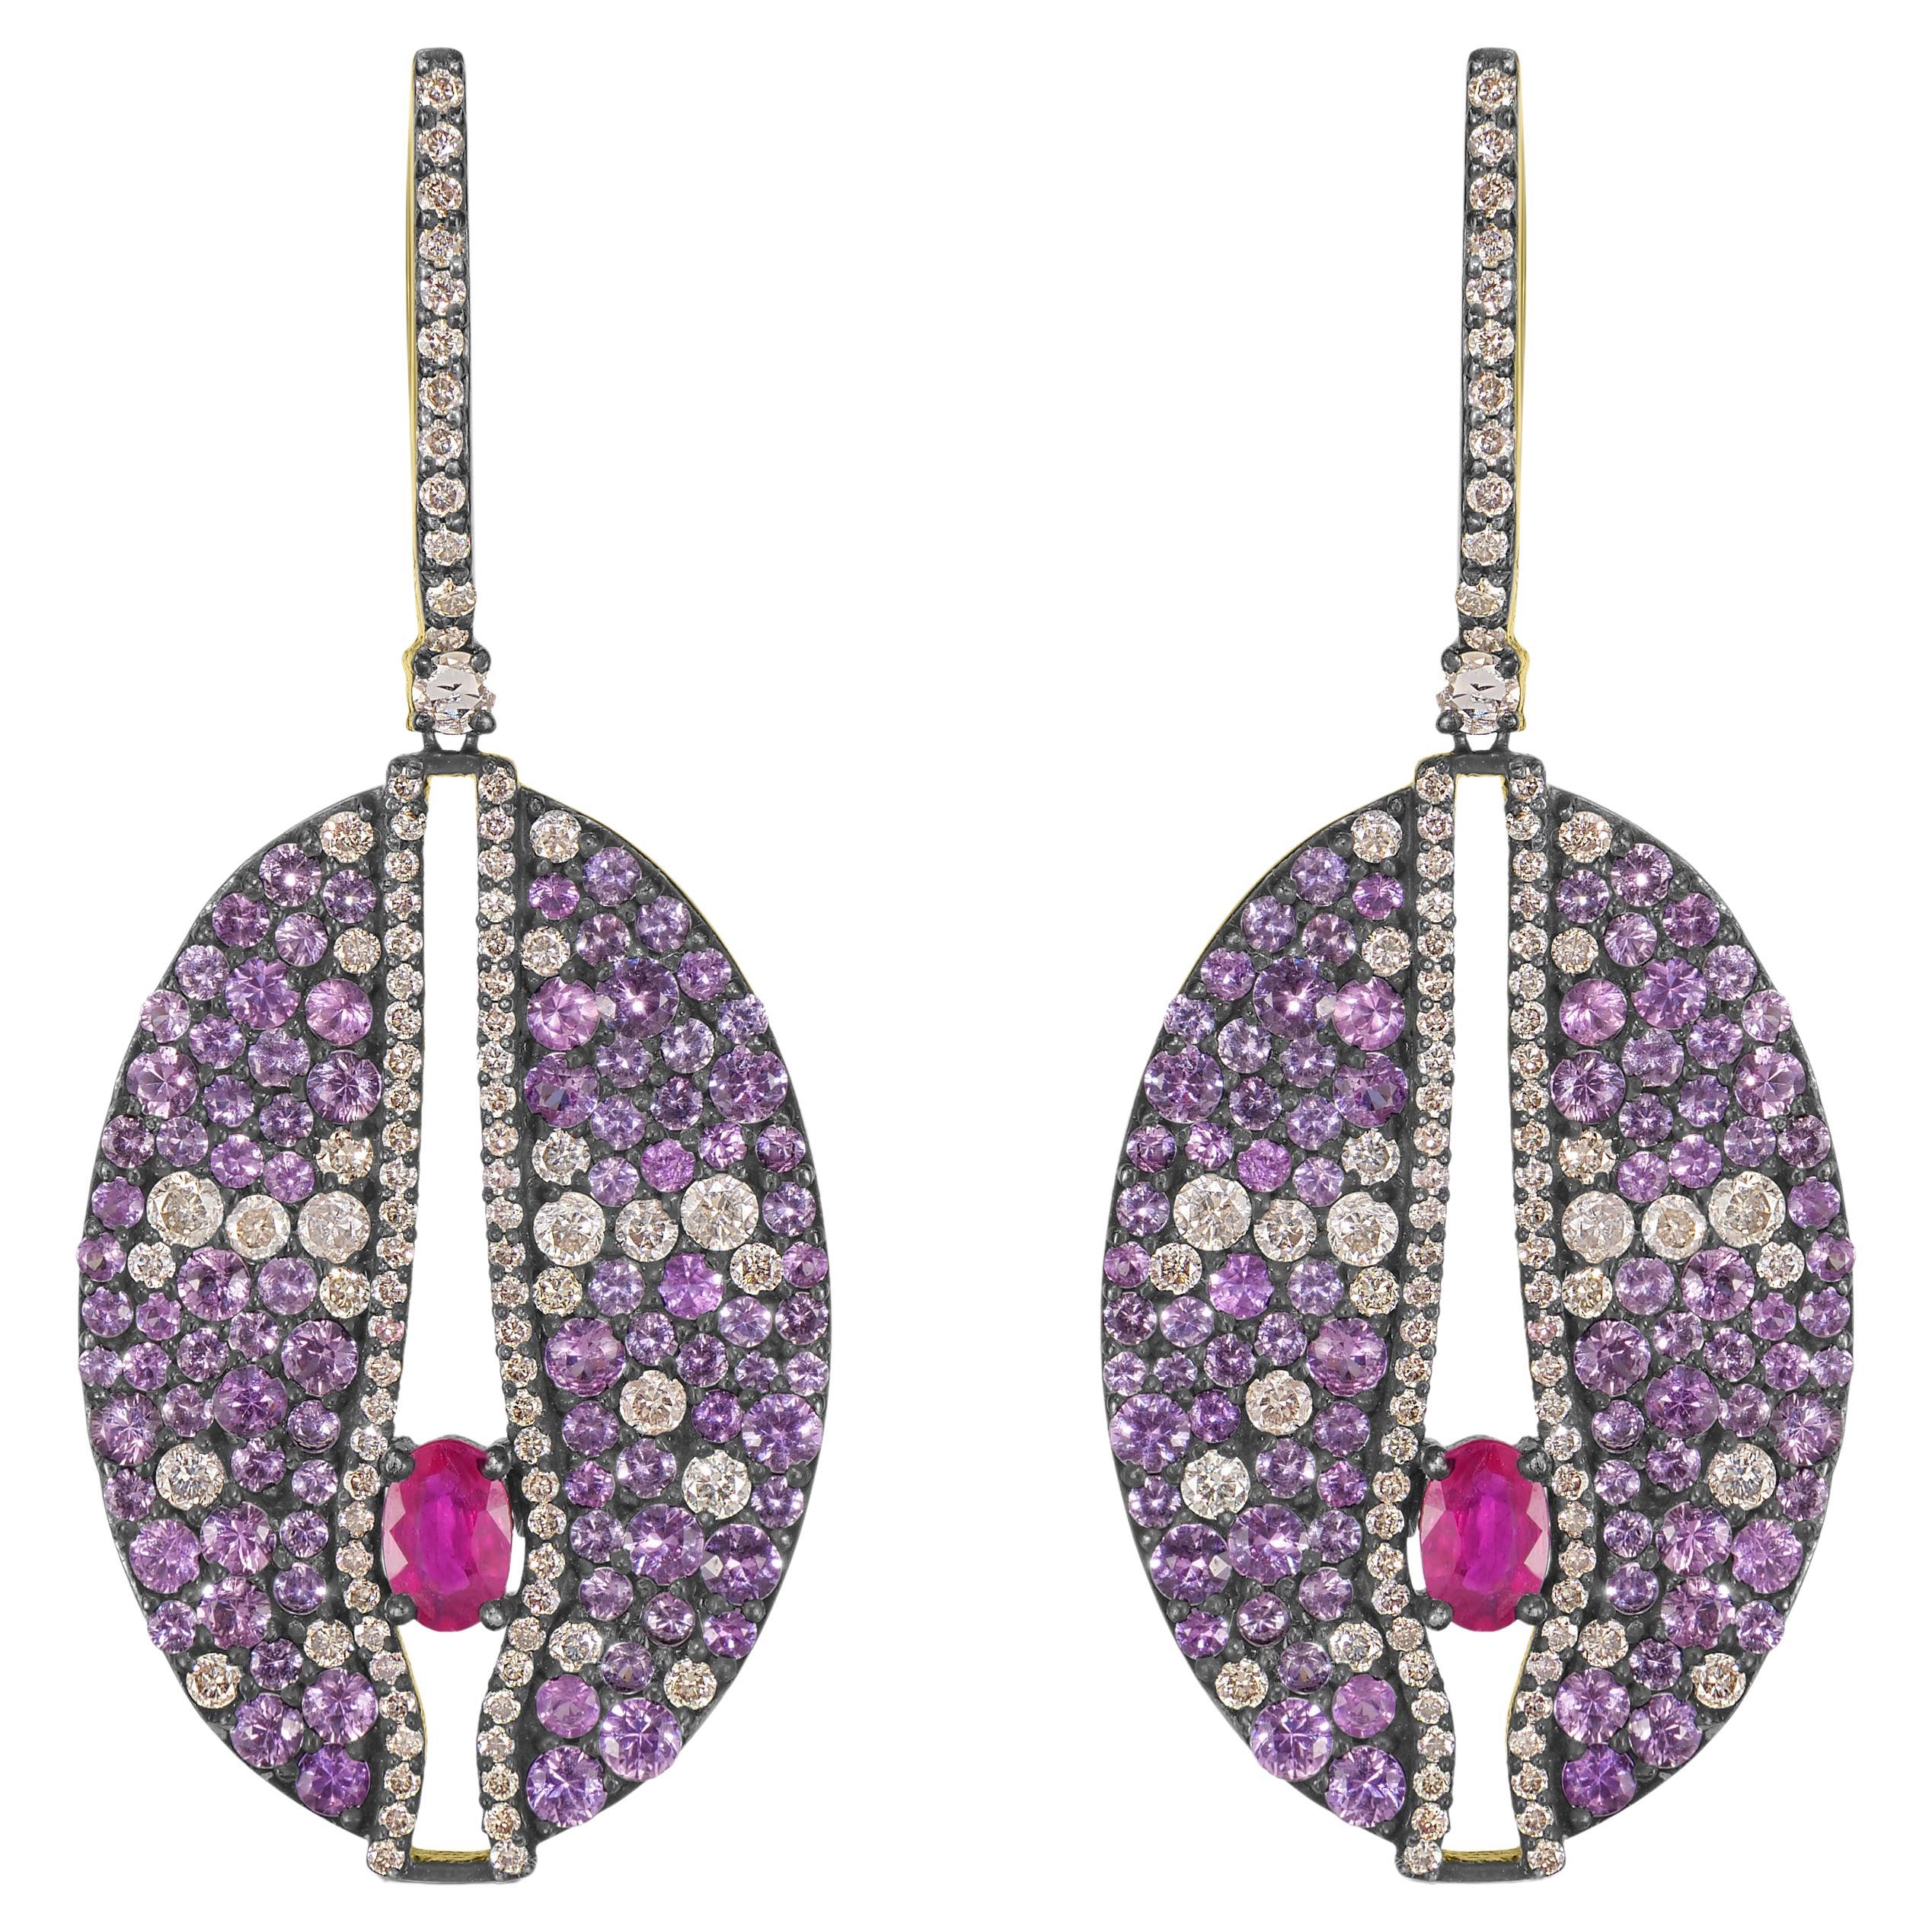 Victorian 11.59 Cttw. Ruby, Pink Sapphire and Diamond Dangle Earrings 